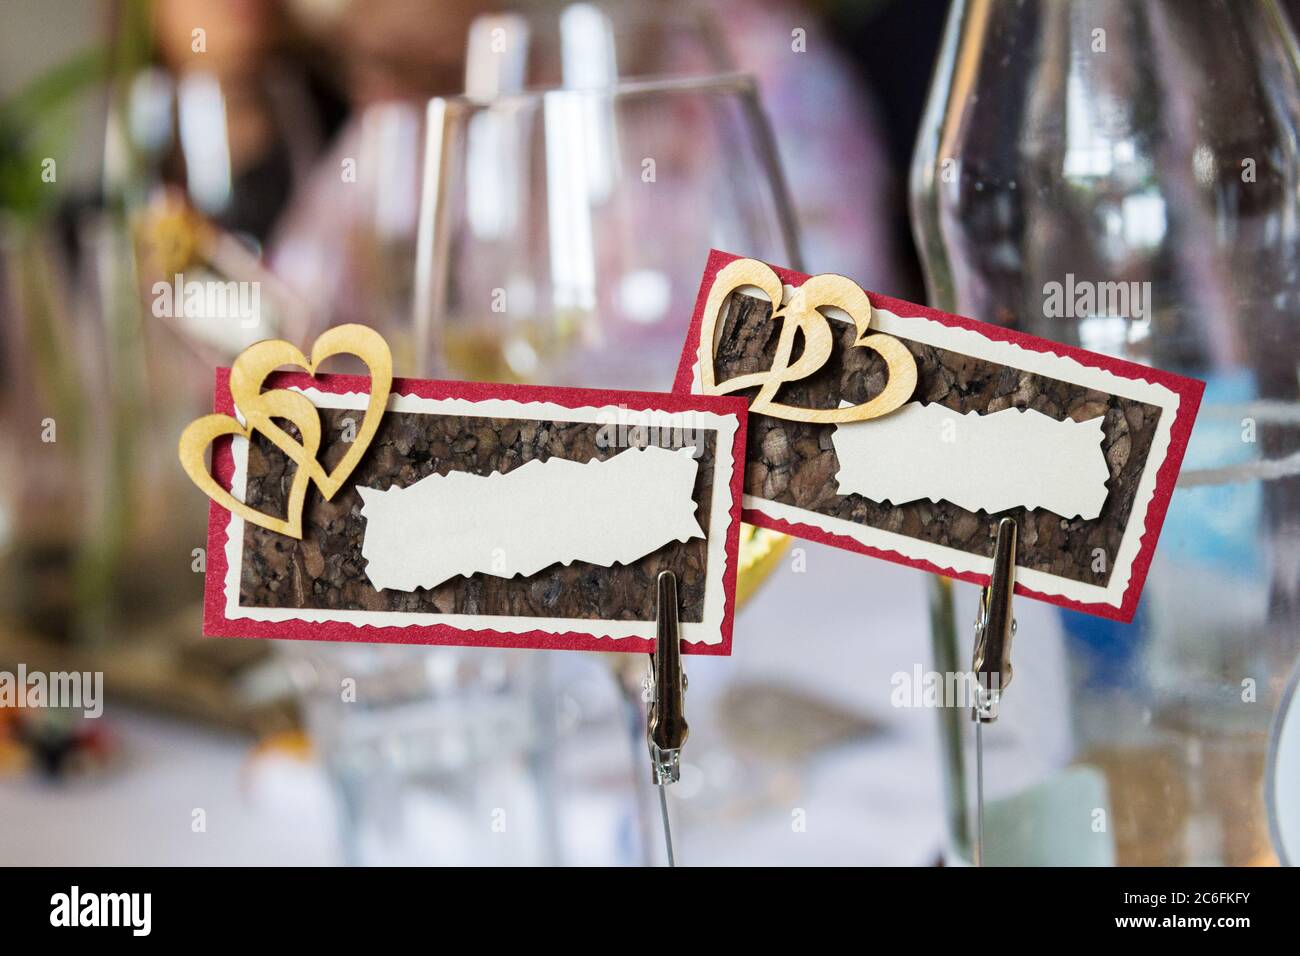 Name plates with double hearts decoration on dinner table for ...